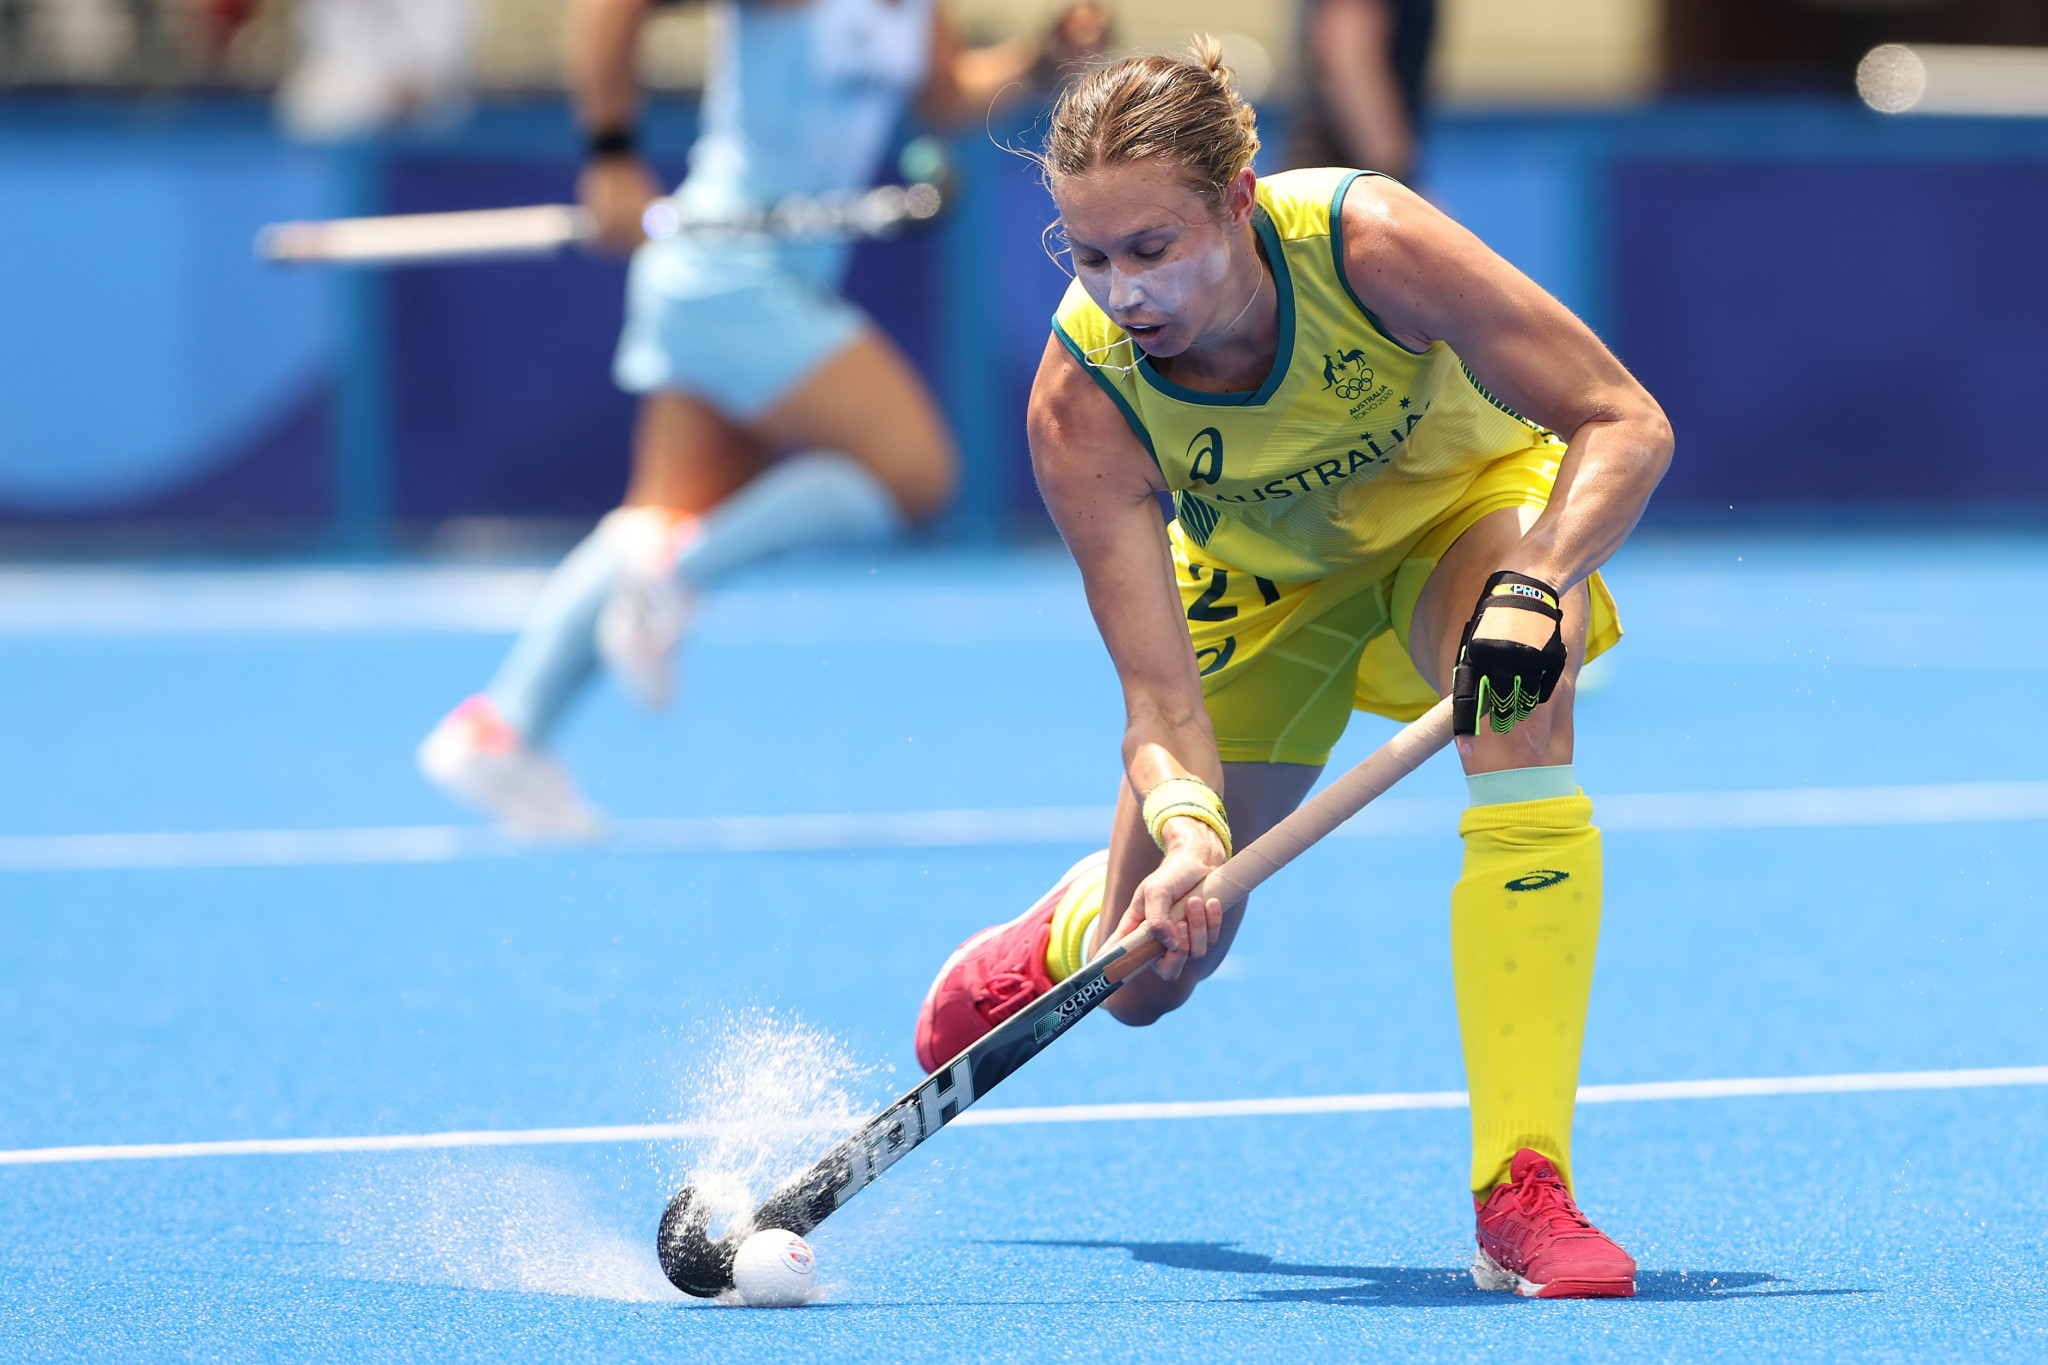 Renee Taylor scored twice from penalty corners as Australia beat hosts Spain to reach the last four ©Getty Images